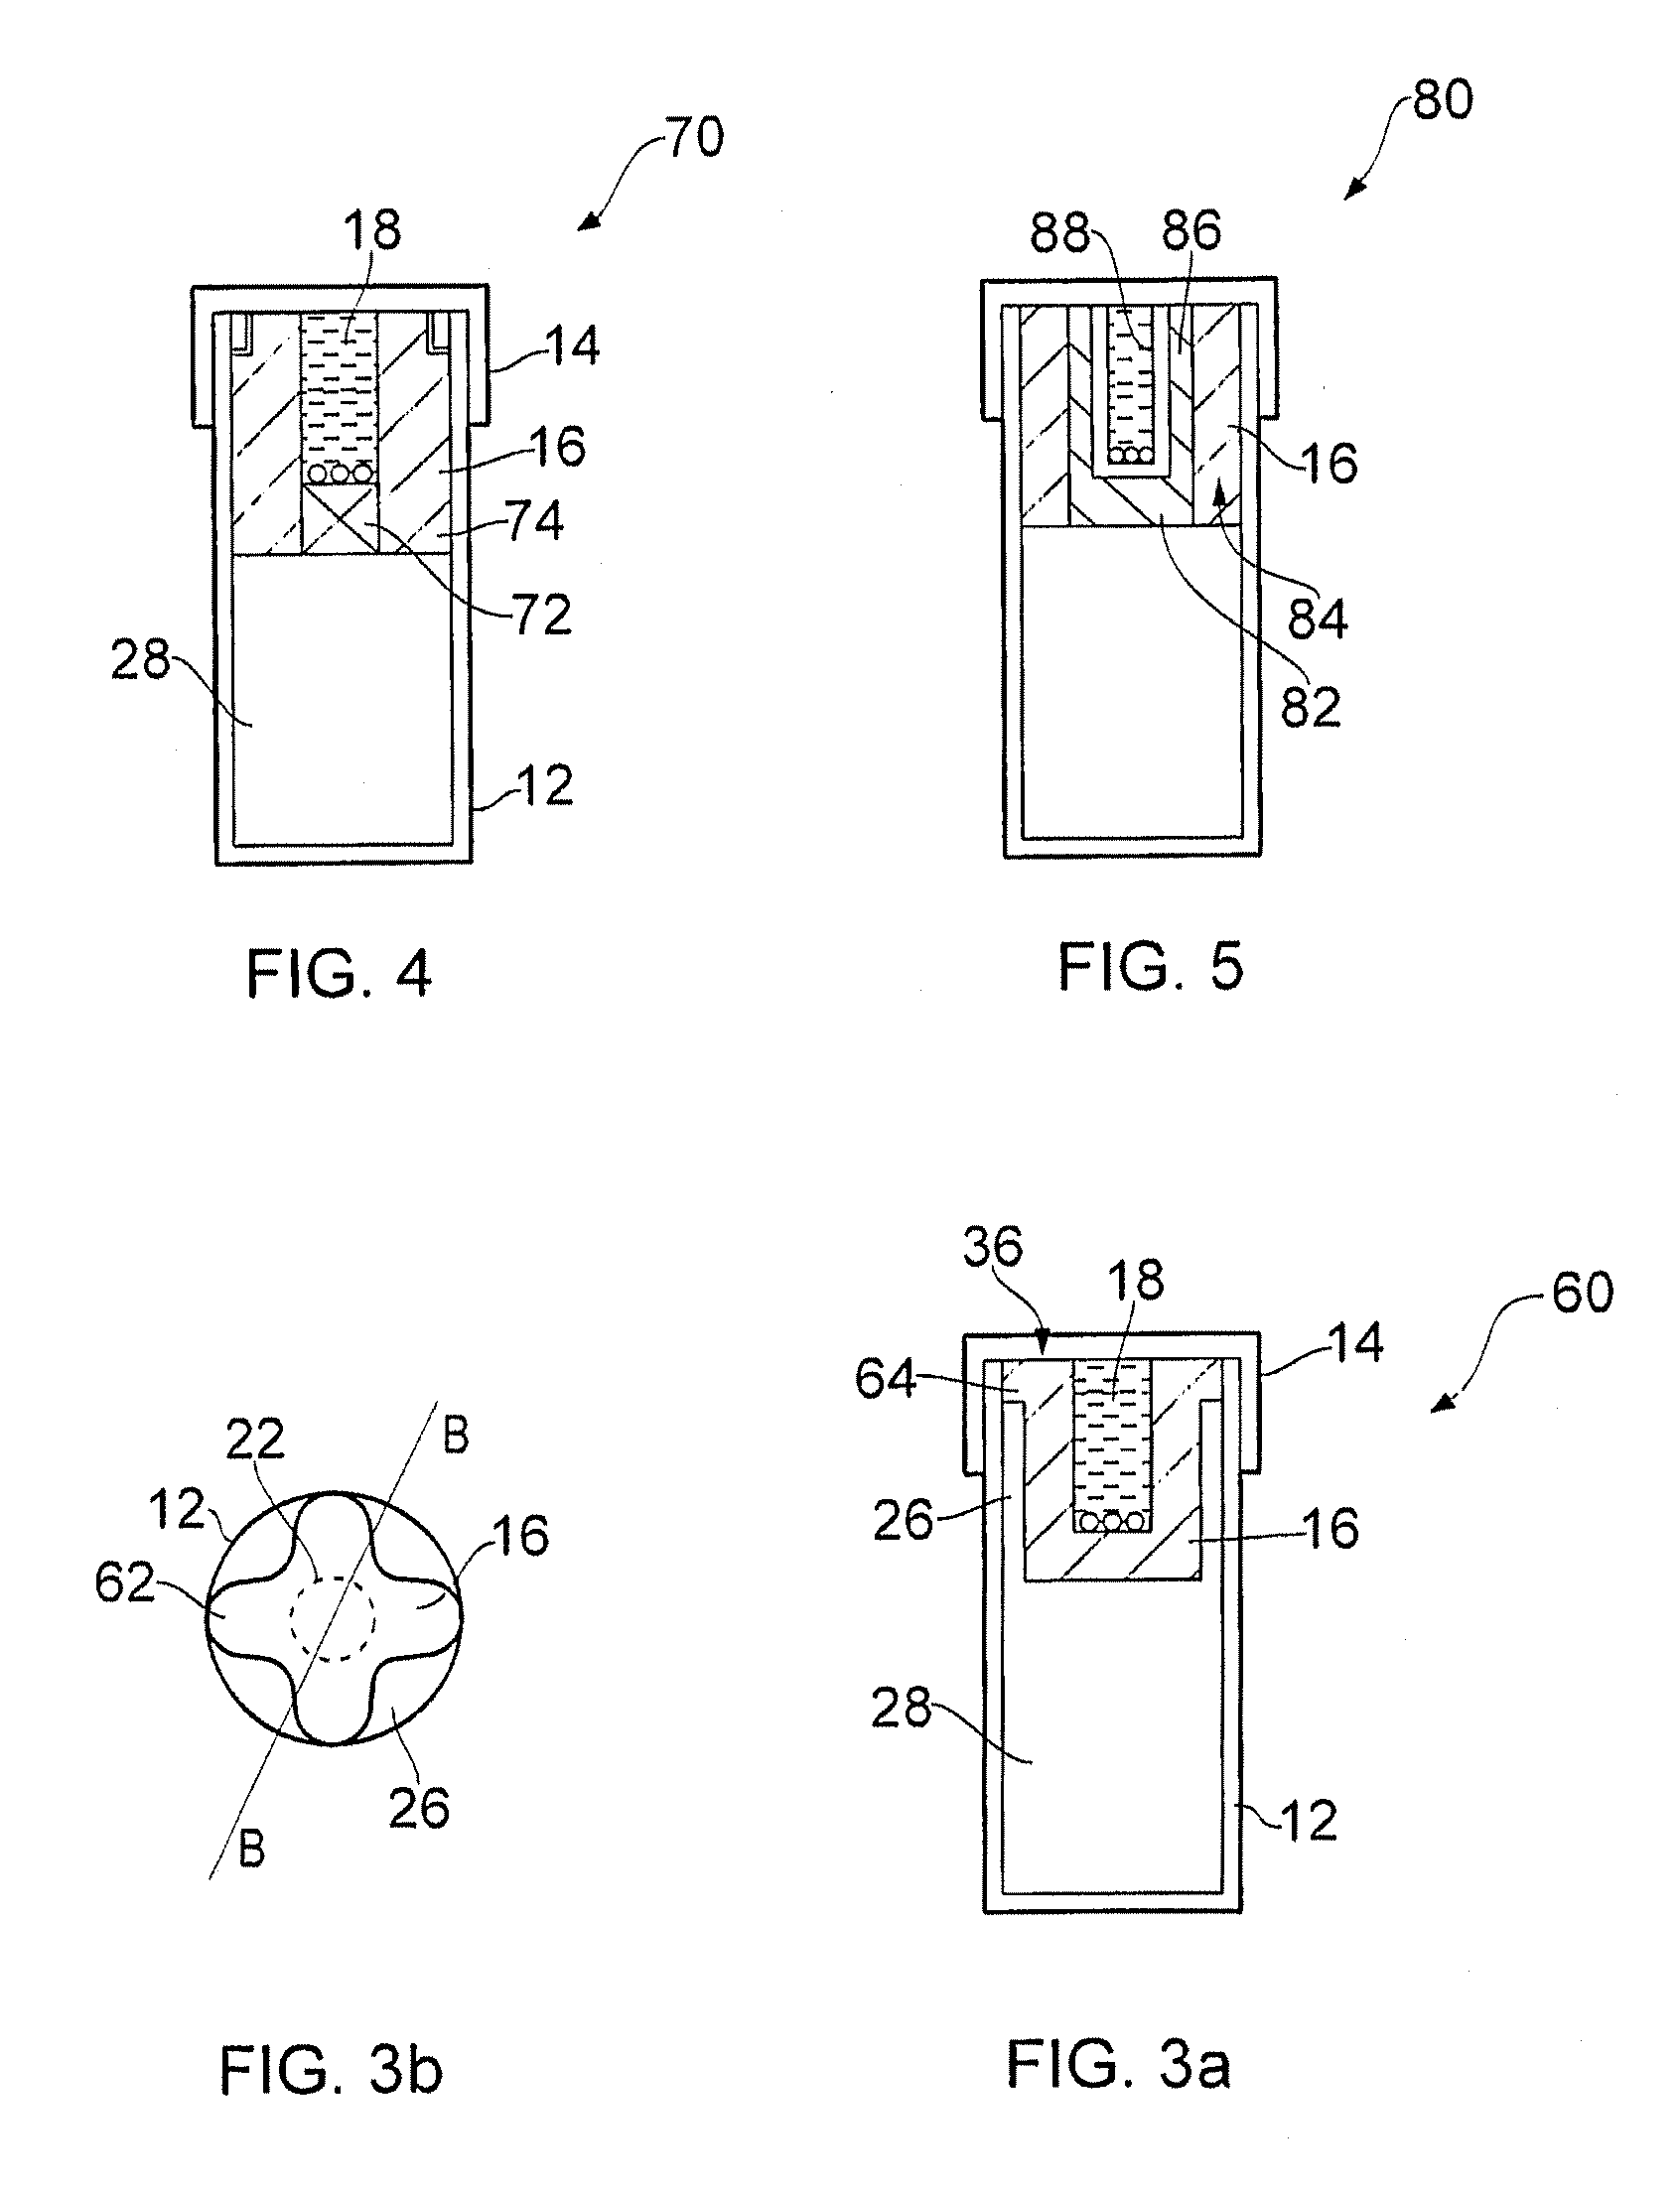 Apparatus and methods for culturing and/or transporting cellular structures